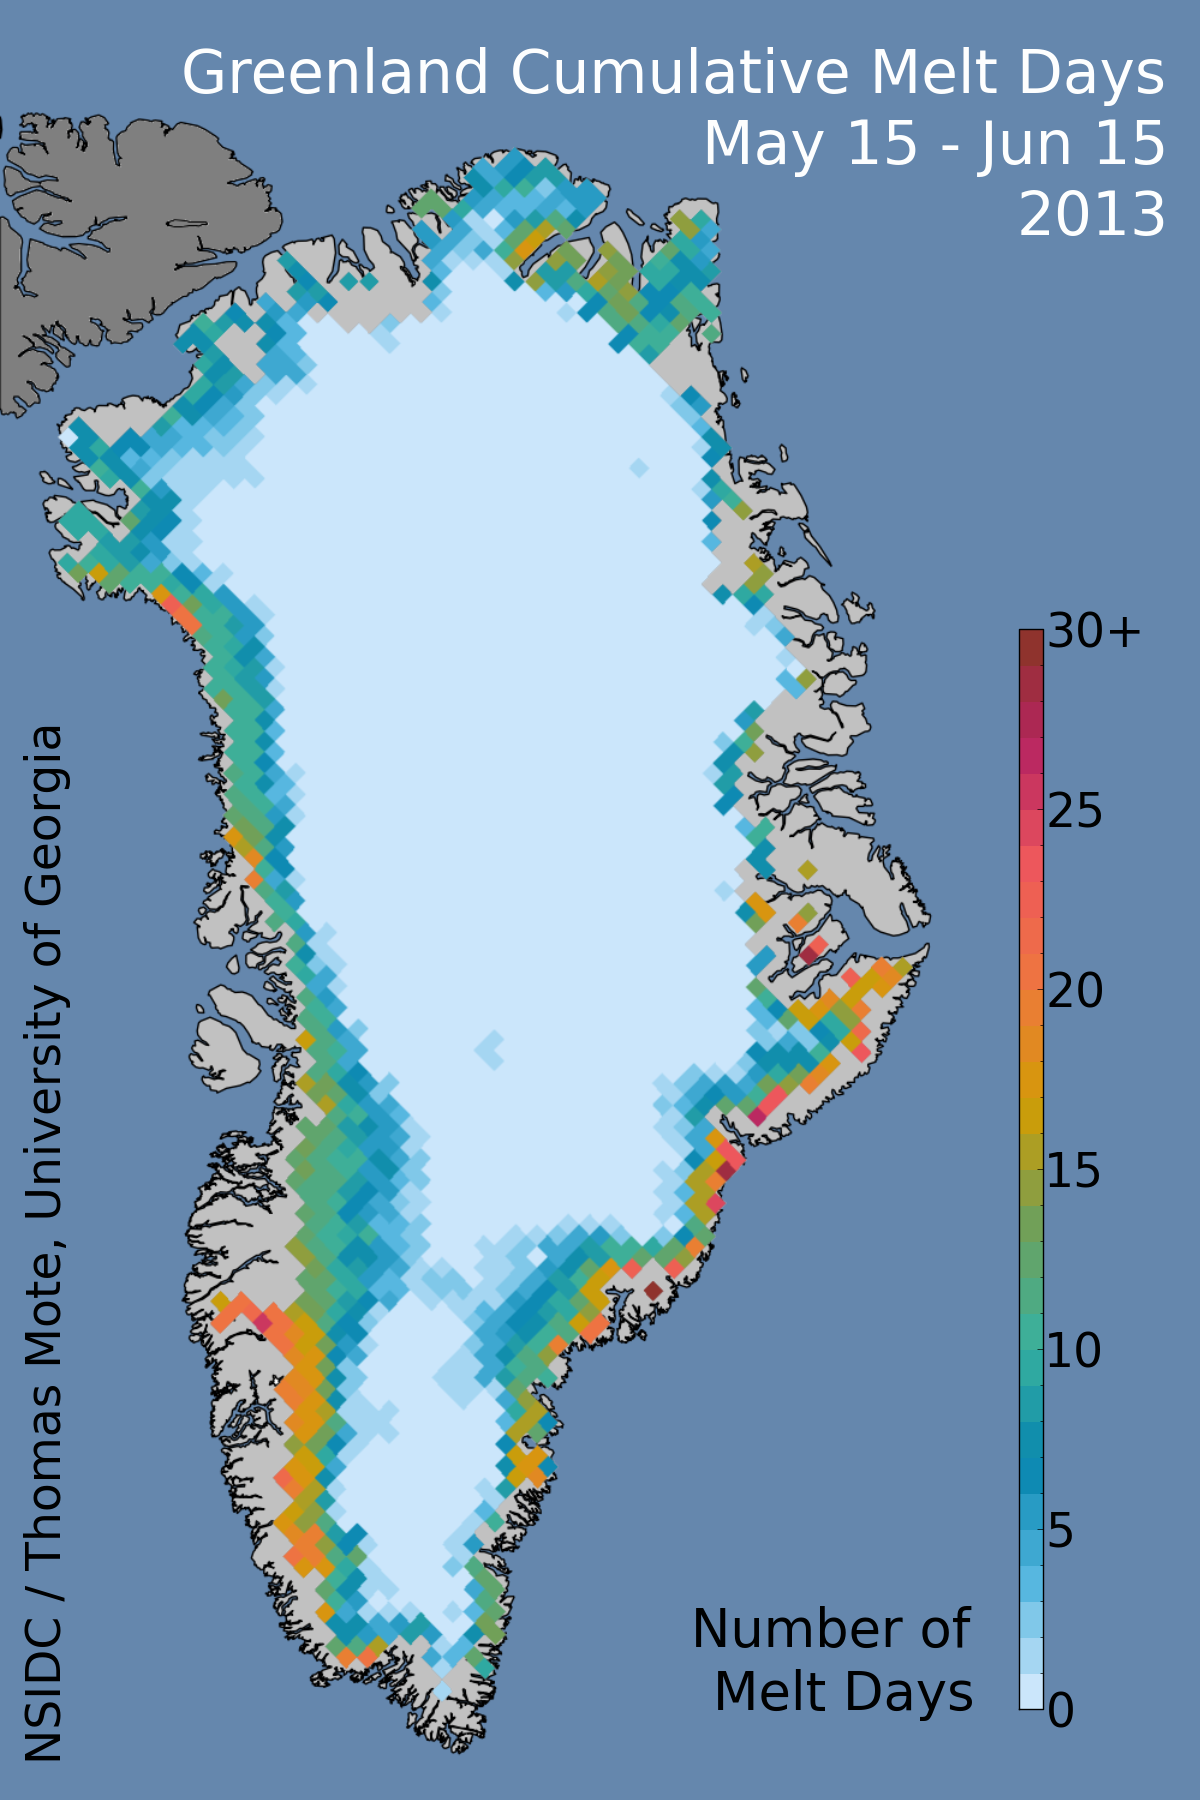 Cumulative surface melt days for mid-May to mid-June in Greenland.